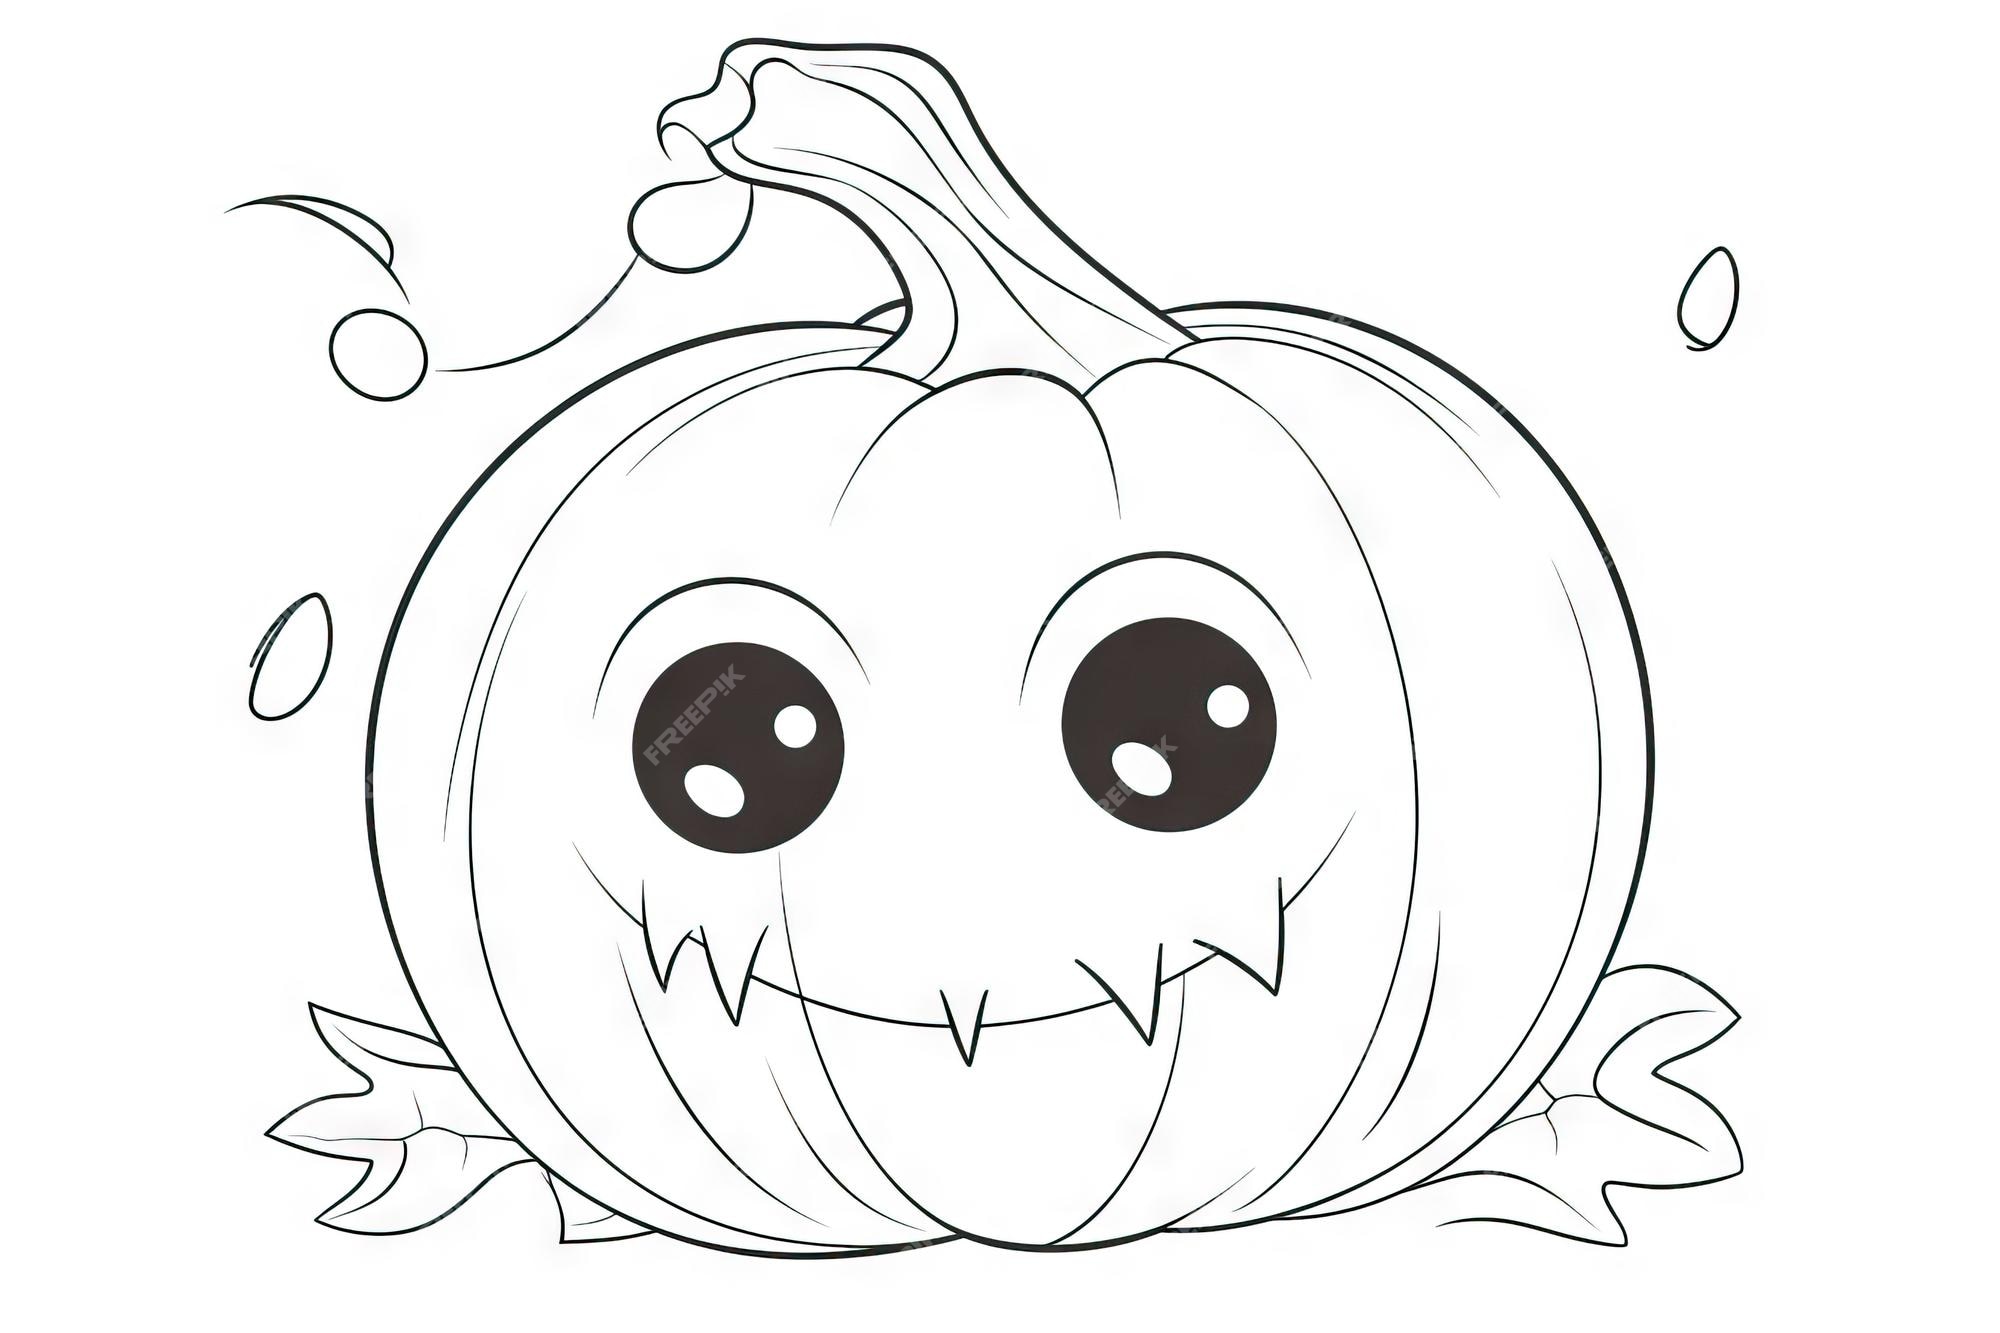 Premium vector coloring sheet of funny halloween jack o lantern pumpkin with black strokes and white background image created with ai software